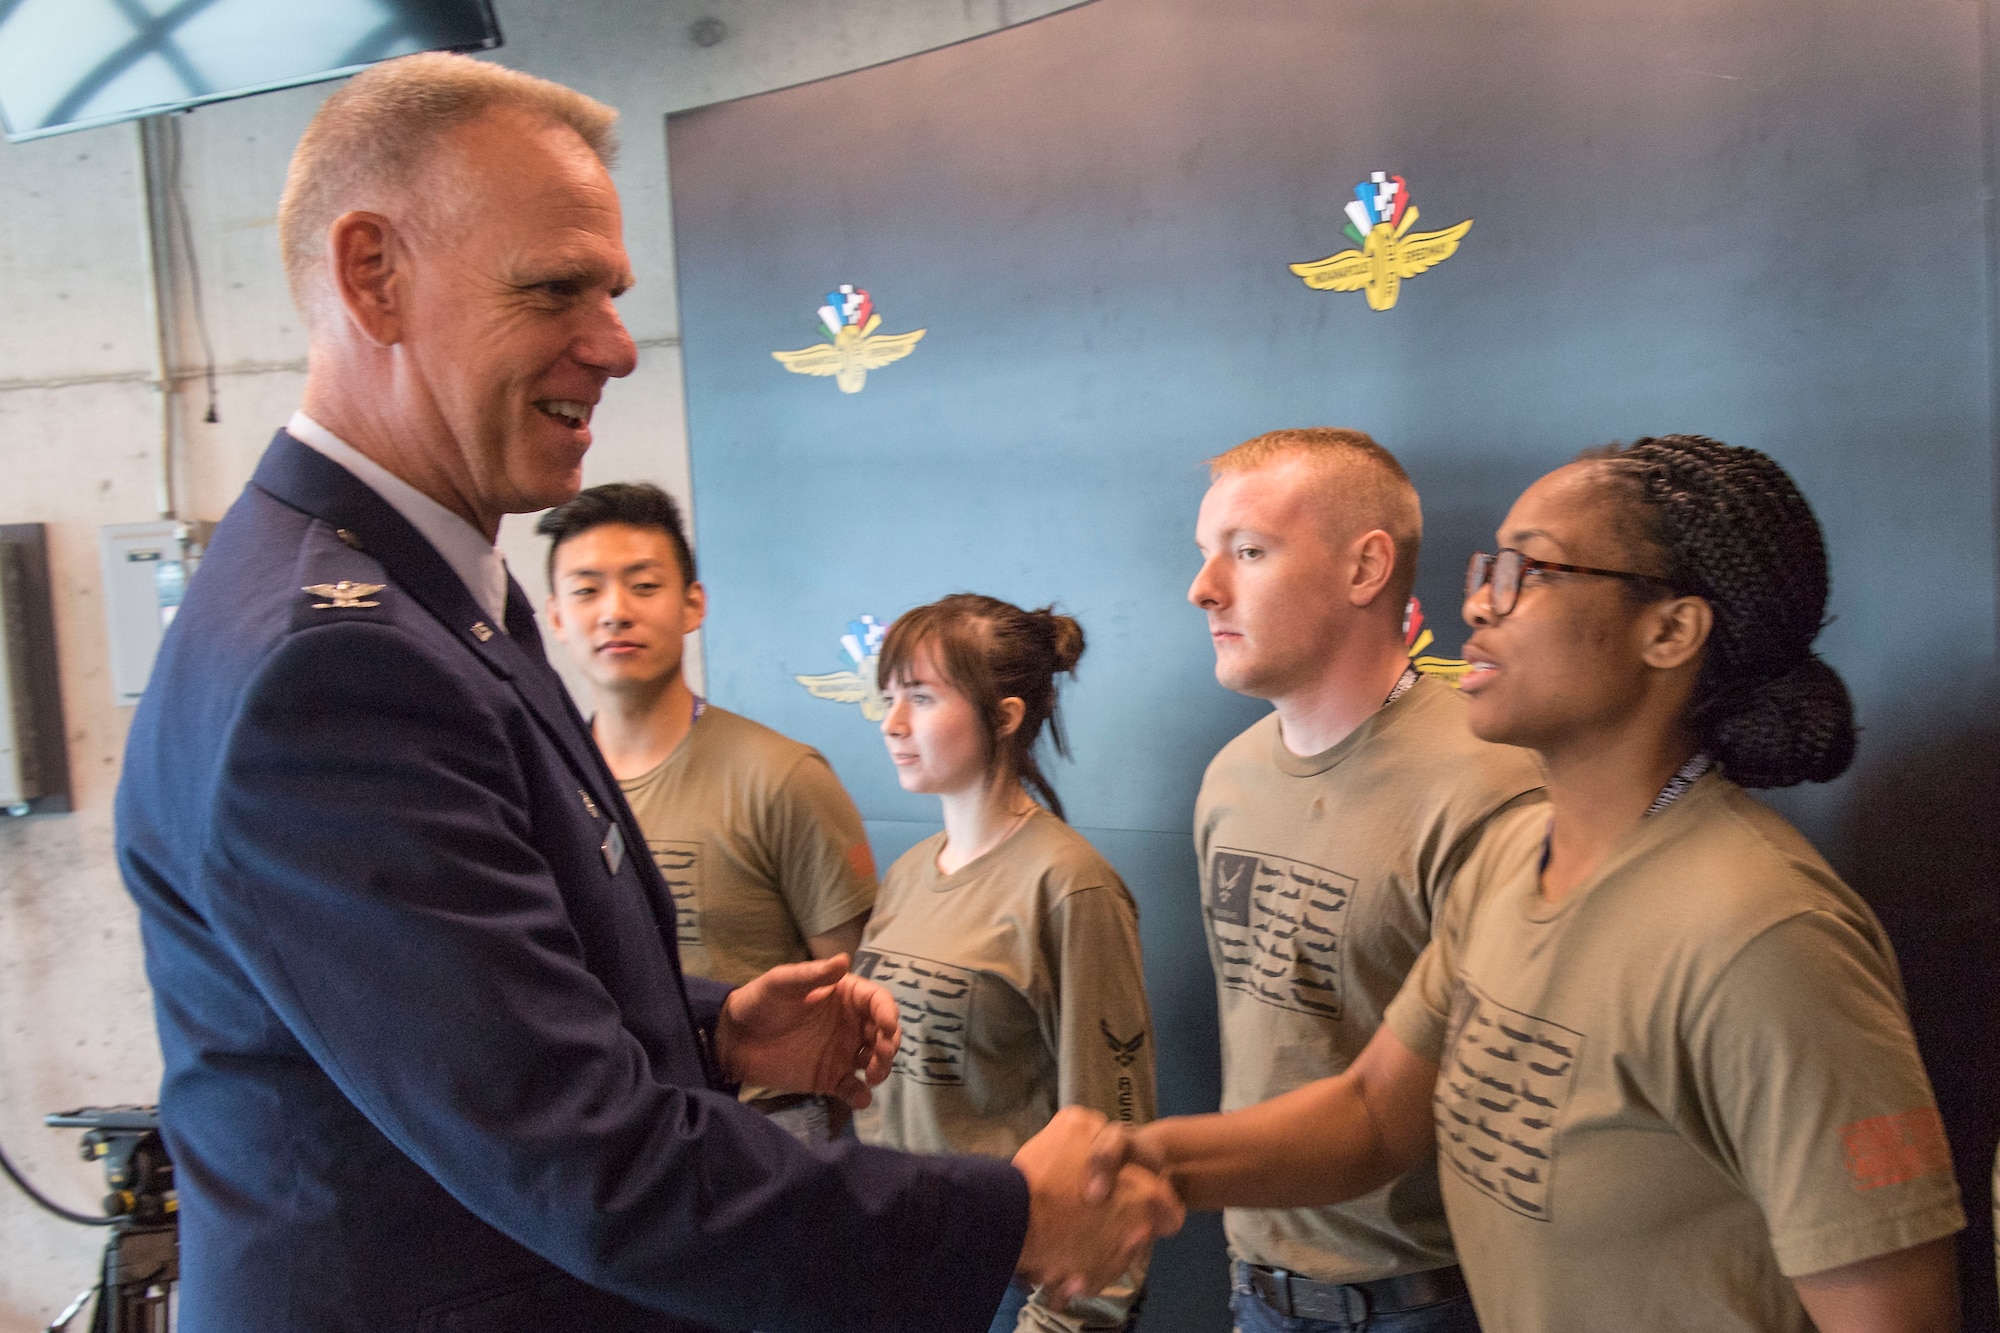 Col. Larry Shaw, 434th Air Refueling Wing commander, congratulates newly enlisted trainee Adrienne White, following a mass enlistment ceremony at the Indianapolis Motor Speedway May 19, 2019. Trainees will begin drilling at Grissom Air Reserve base, Indiana in the Developmental Training Flight prior to attending Air Force basic training. (U.S. Air Force photo/Master Sgt. Ben Mota)